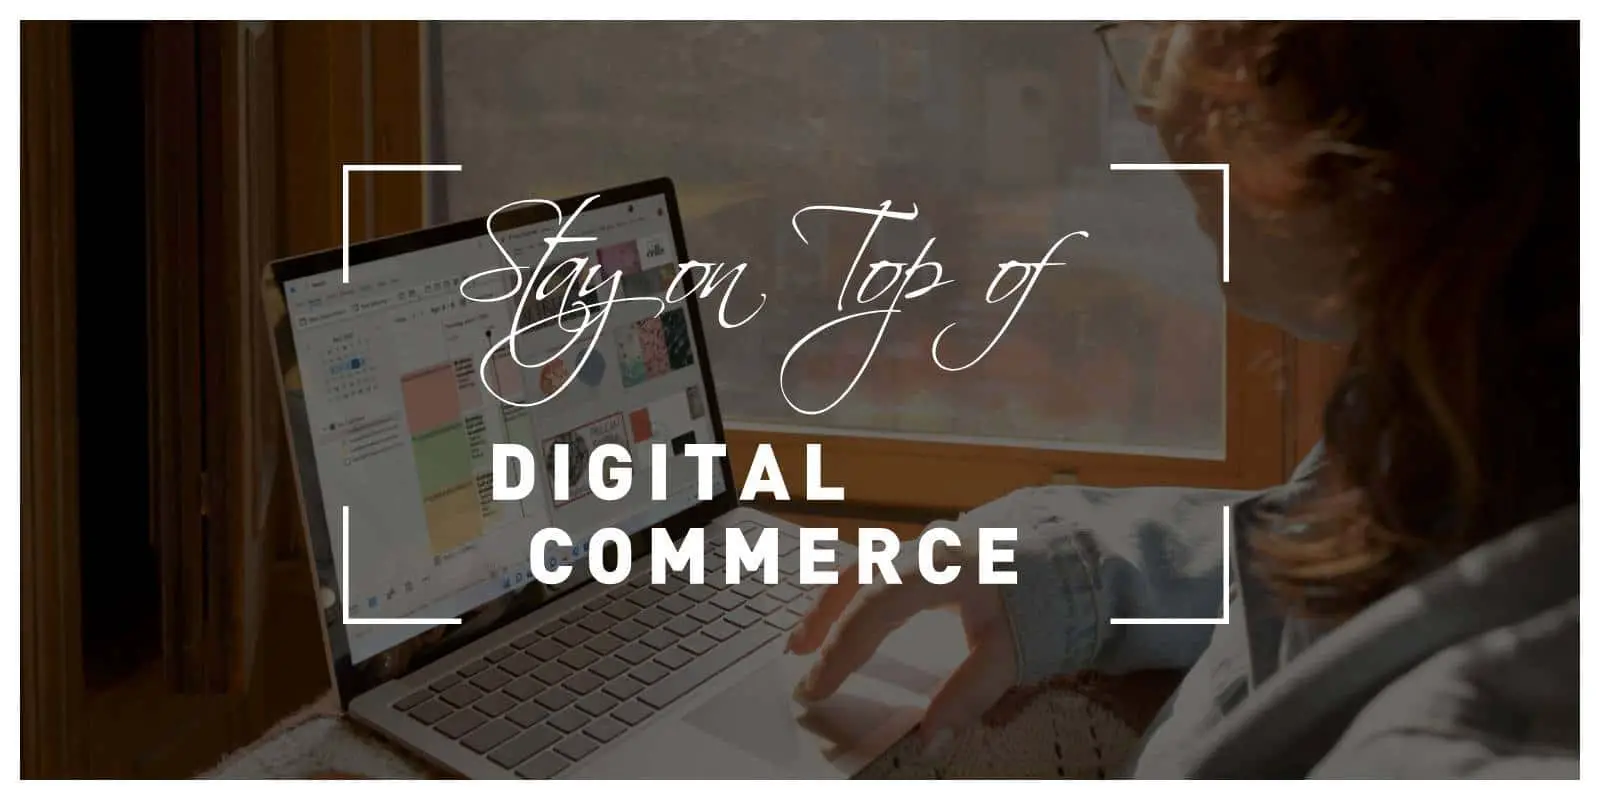 Three Tips to Stay on Top of the New Era of Digital Commerce